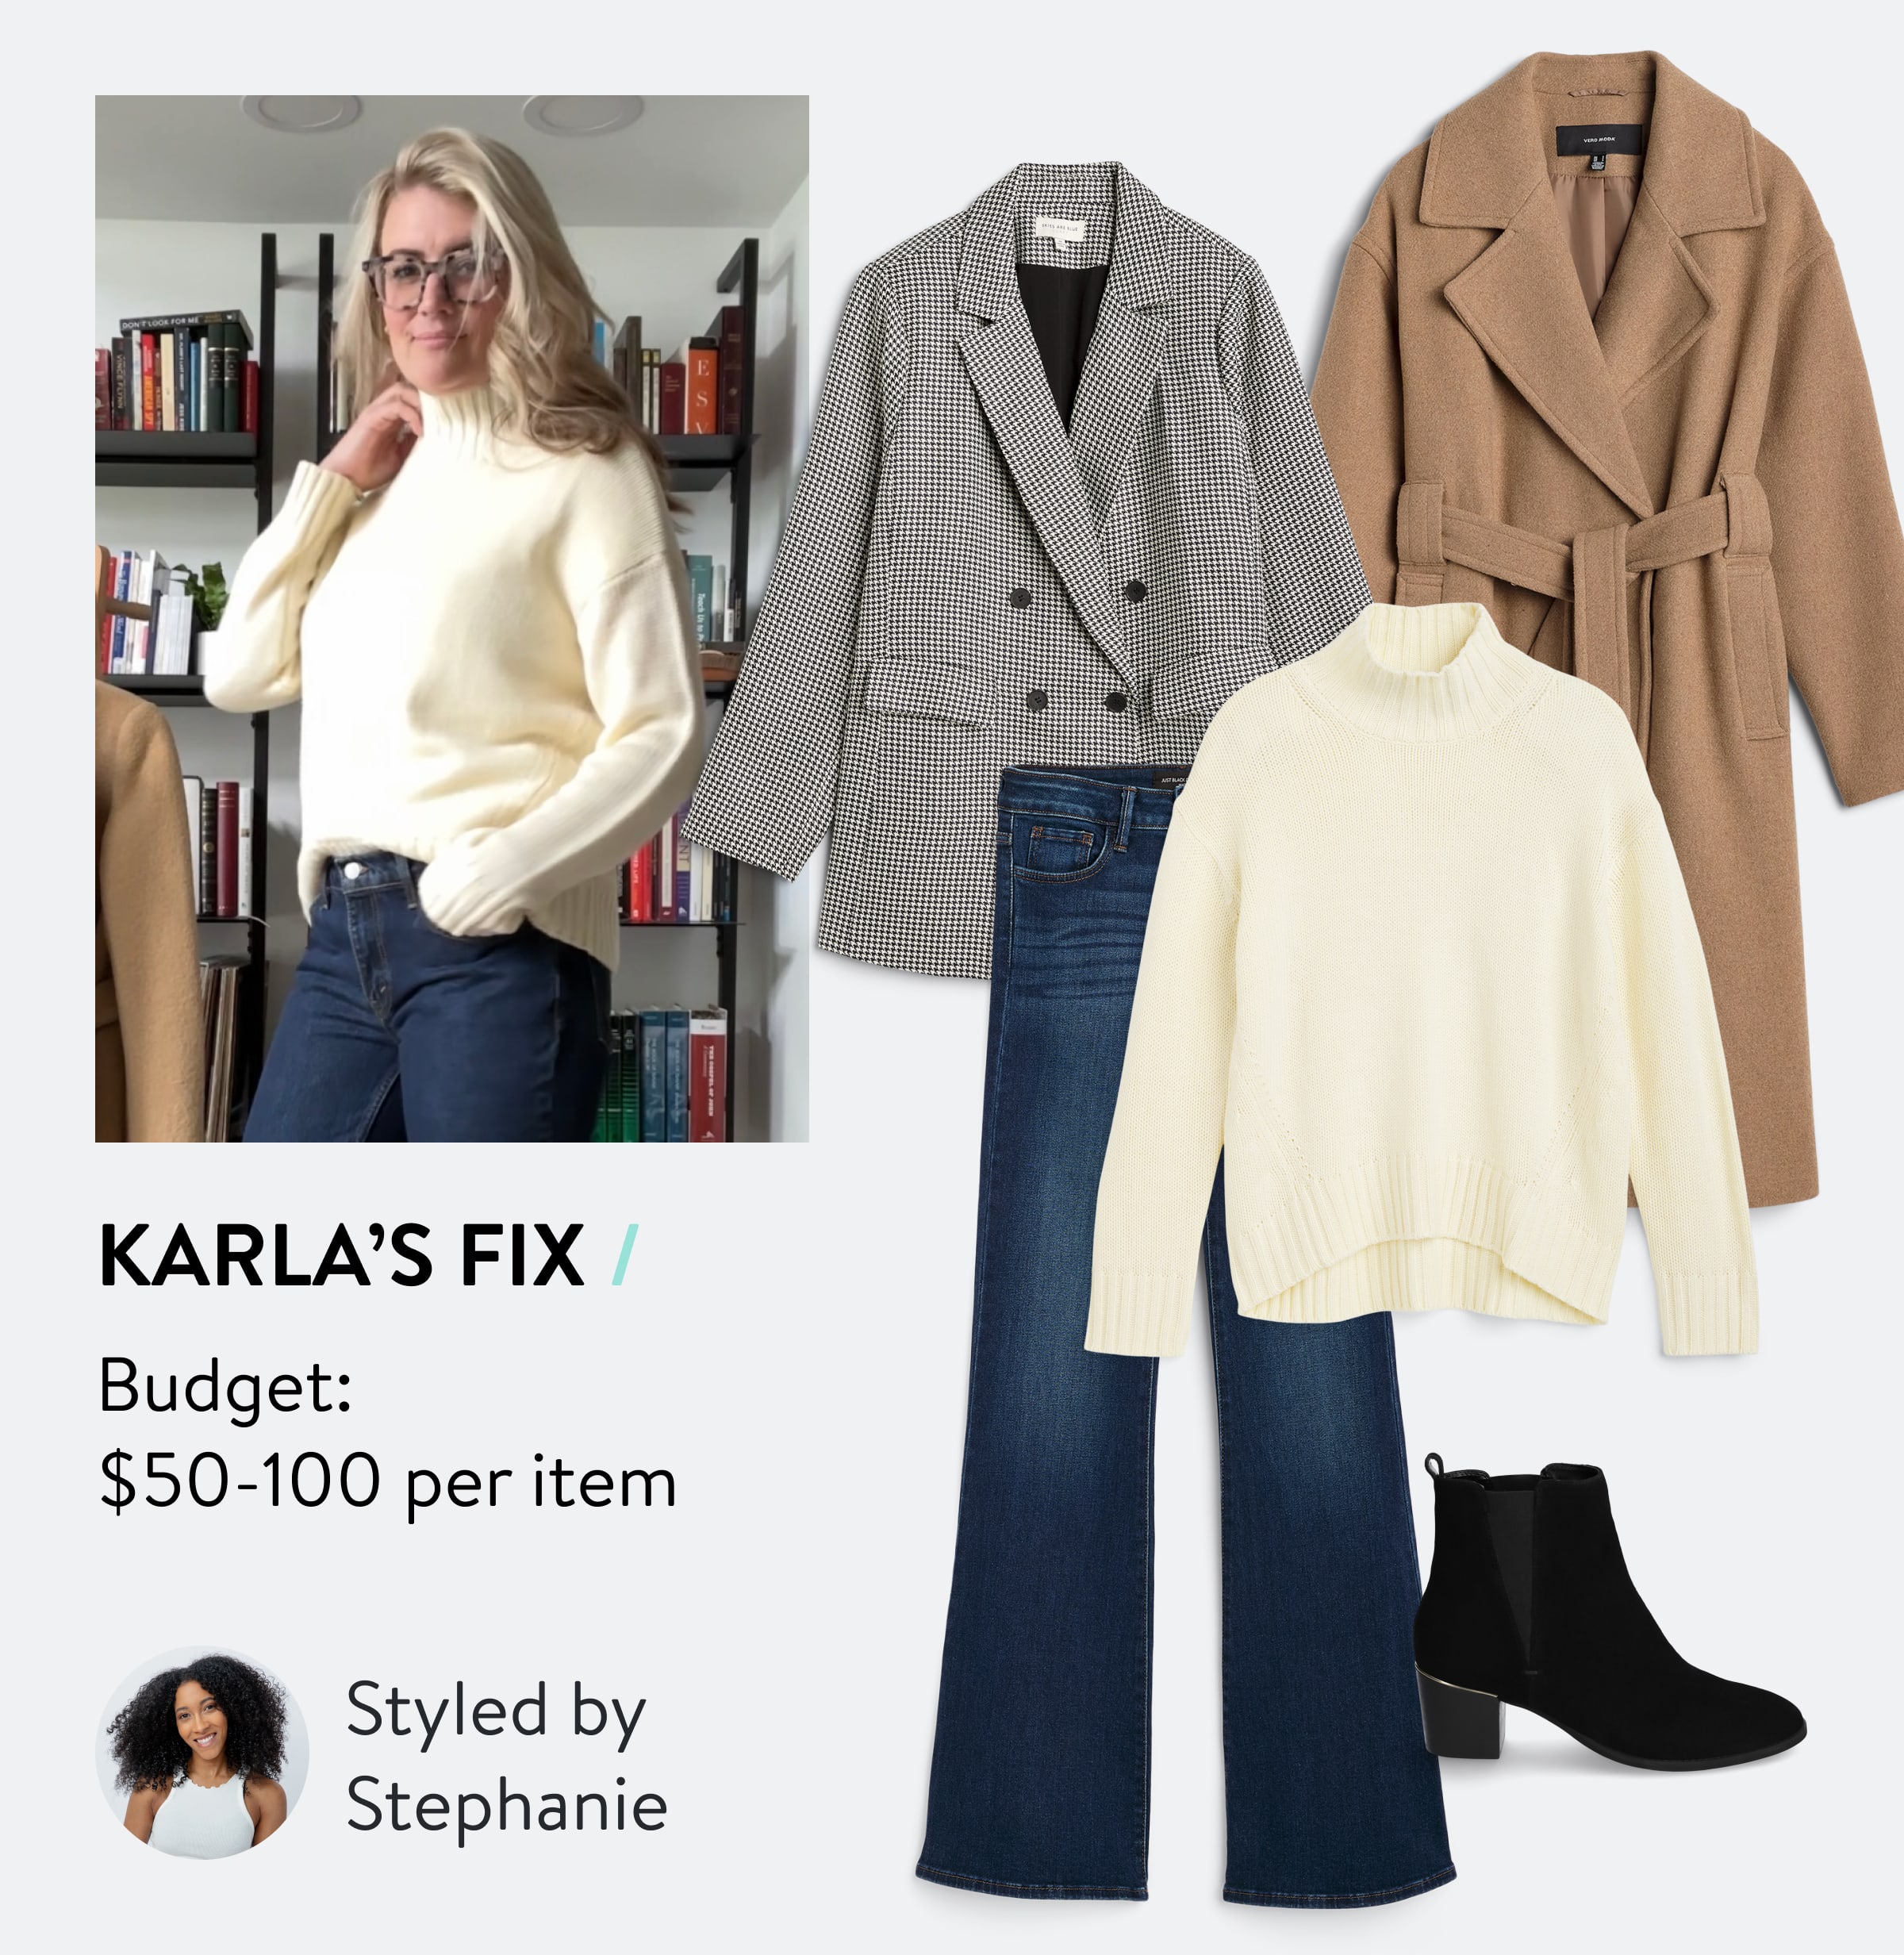 Karla’s Fix. Budget $50-100 per item. Styled by Stephanie. Woman in glasses wearing Stitch Fix cream sweater and jeans, selection of Stitch Fix outfit with dark jeans, cream turtleneck sweater, check blazer, camel coat, black bootie, Stitch Fix Stylist wearing white tank top